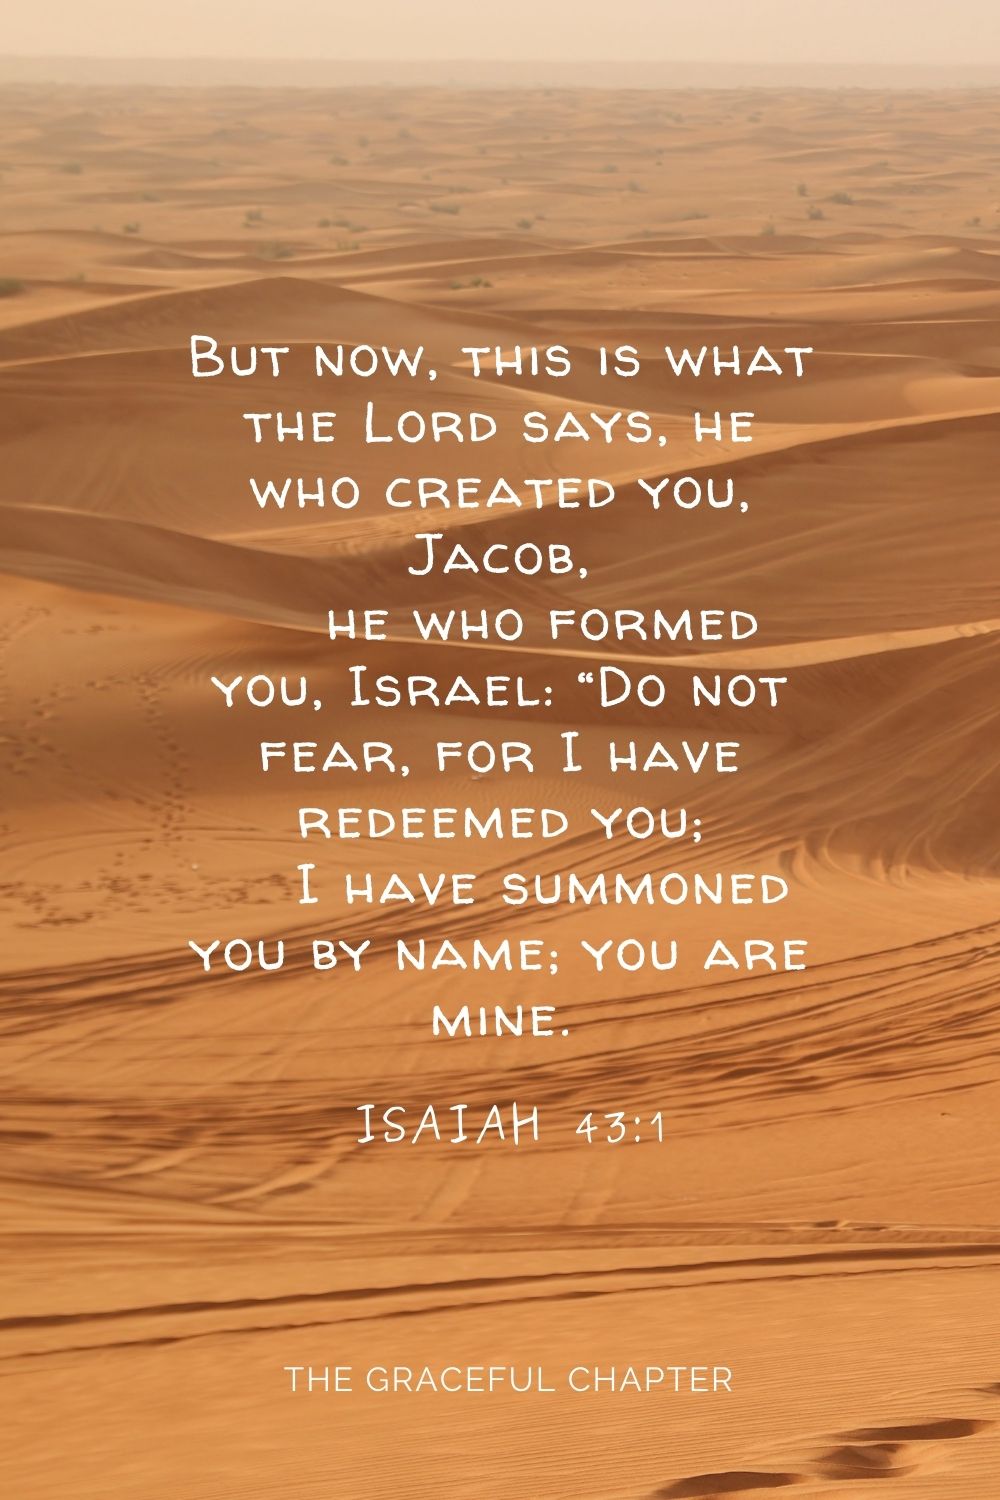 But now, this is what the Lord says he who created you, Jacob, he who formed you, Israel: “Do not fear, for I have redeemed you; I have summoned you by name; you are mine. Isaiah 43:1